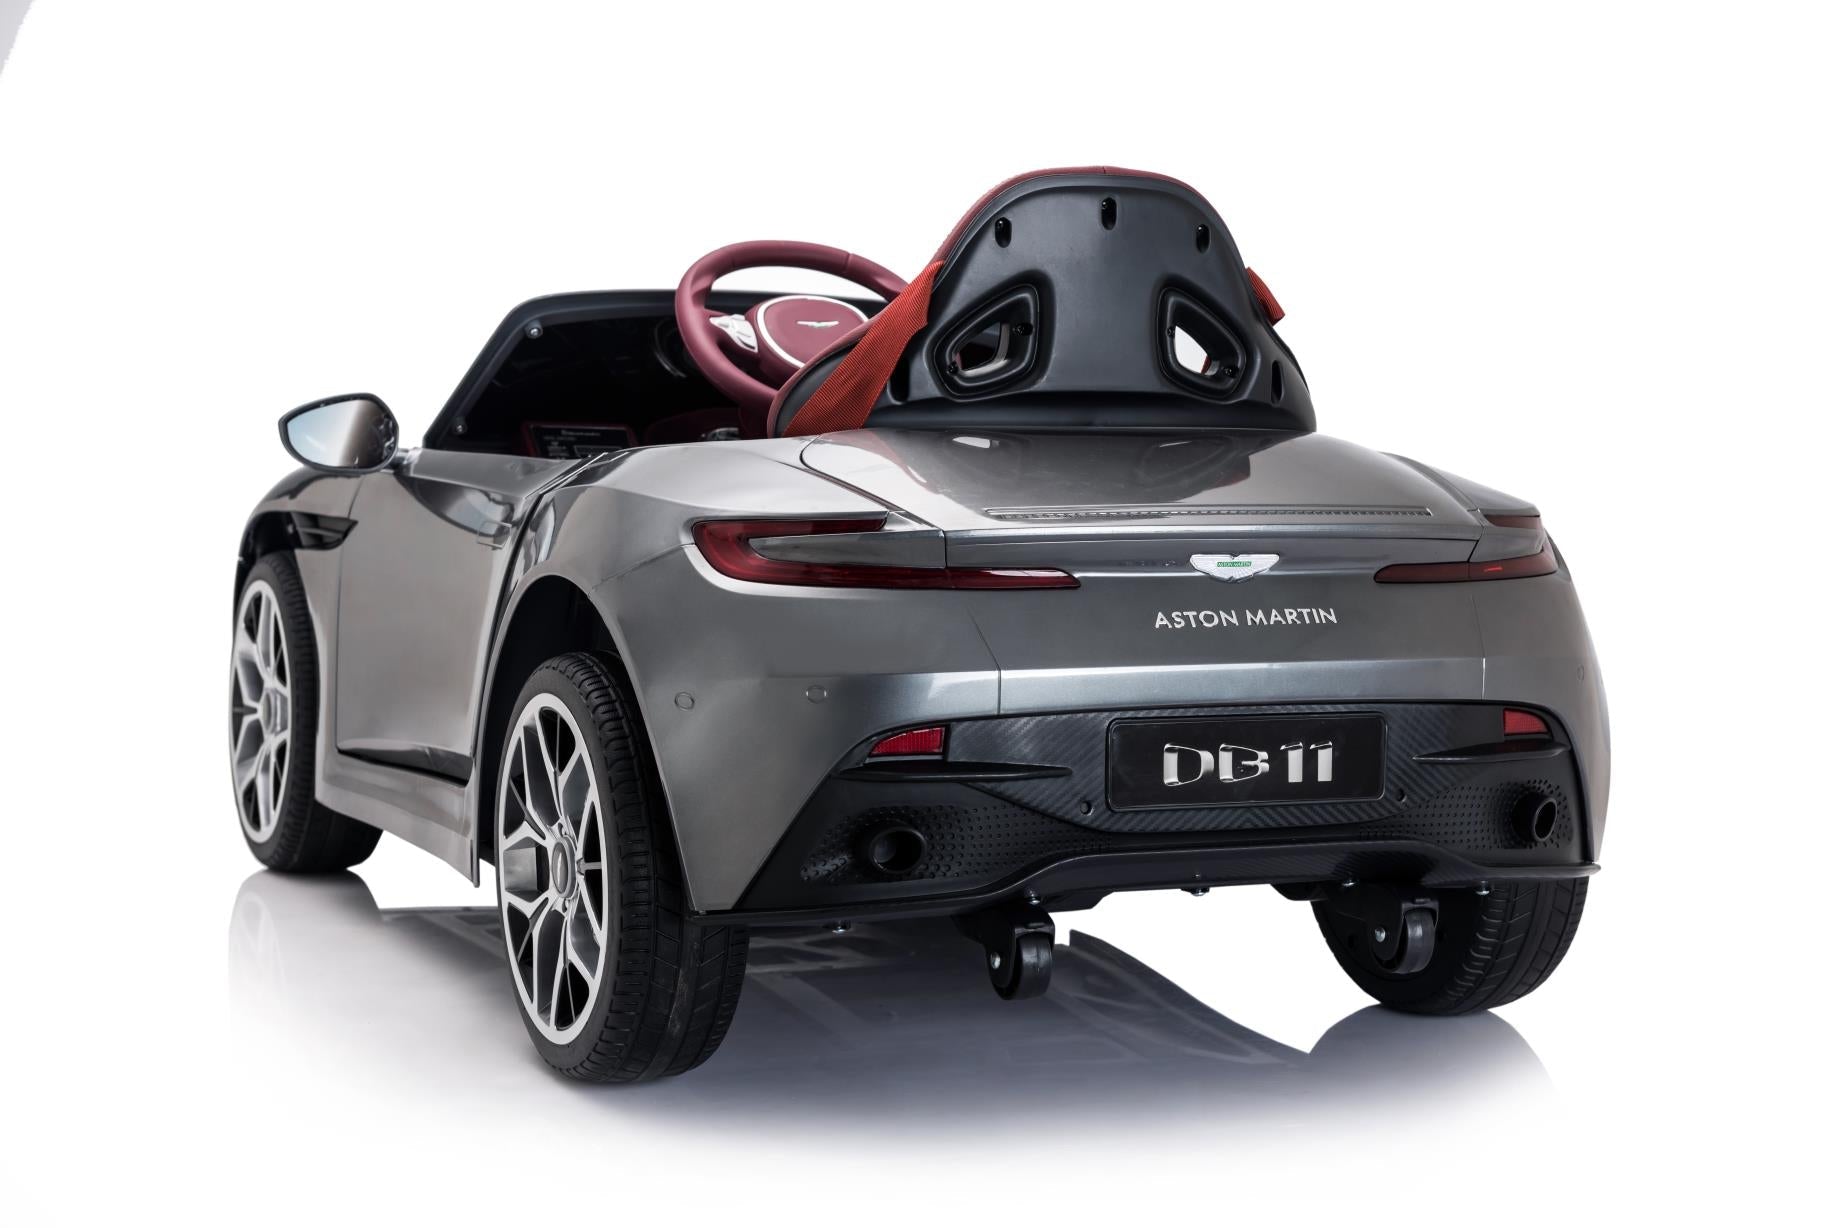 Other options could include:

1. "Child's grey Aston Martin DB11 electric ride-on car with remote control features."
2. "Small-sized grey Aston Martin DB11 electric ride-on car designed for children, depicted on a white background."
3. "Grey Aston Martin DB11 battery-powered ride-on toy vehicle for children with parental control feature."
4. "Children's Grey Aston Martin DB11 electronic ride car on white background."